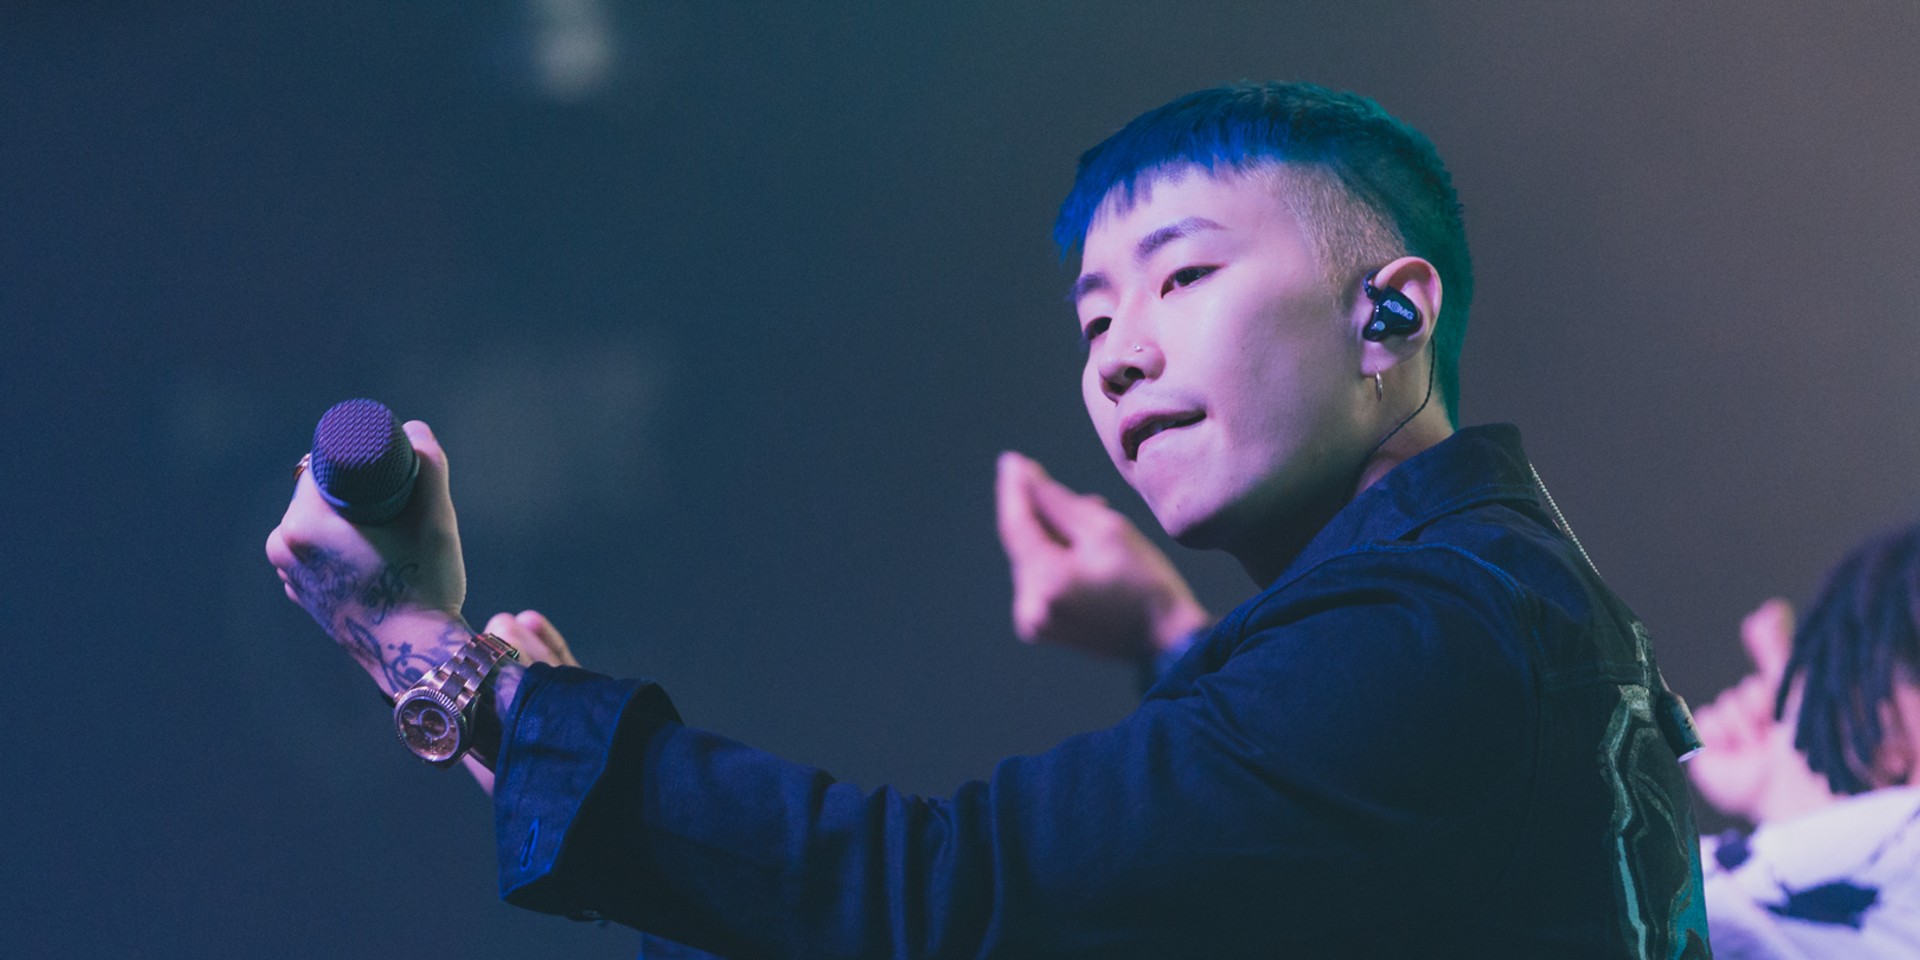 Jay Park dazzles and inspires with captivating performance at Singapore show – gig report